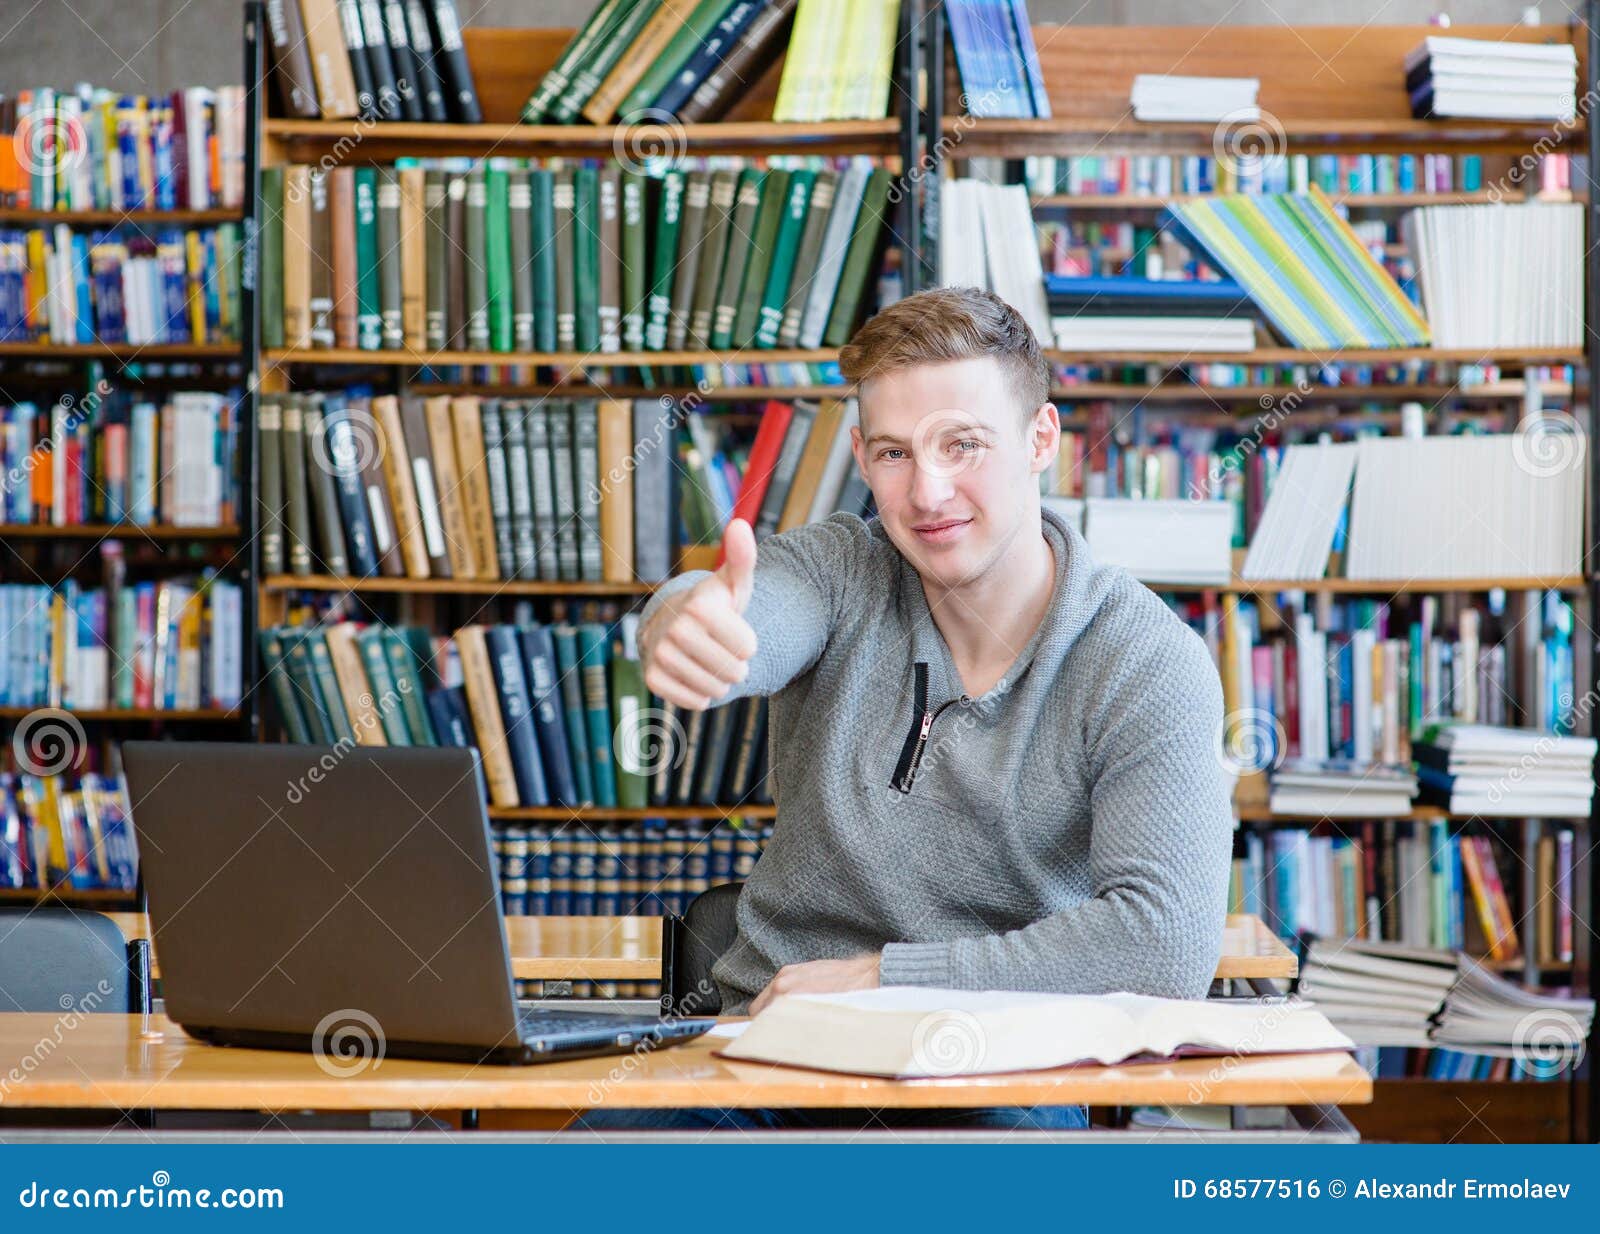 Male Student with Laptop Showing Thumbs Up in the University Library ... pic